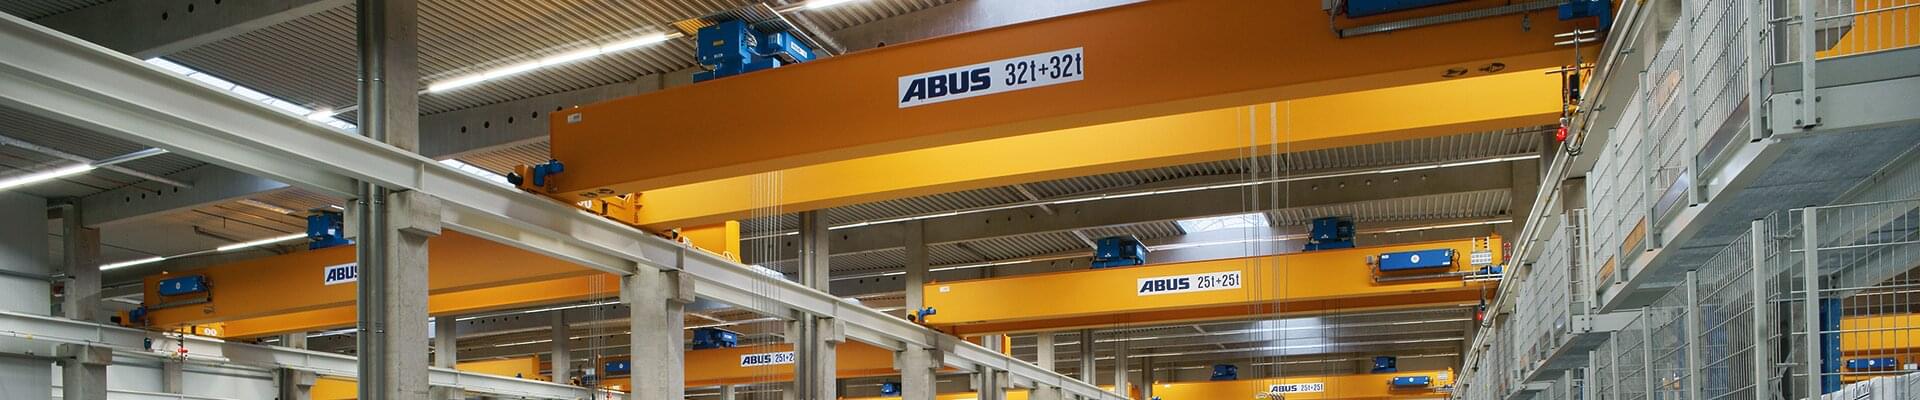  ABUS cranes in companies for cutting and winding technology 